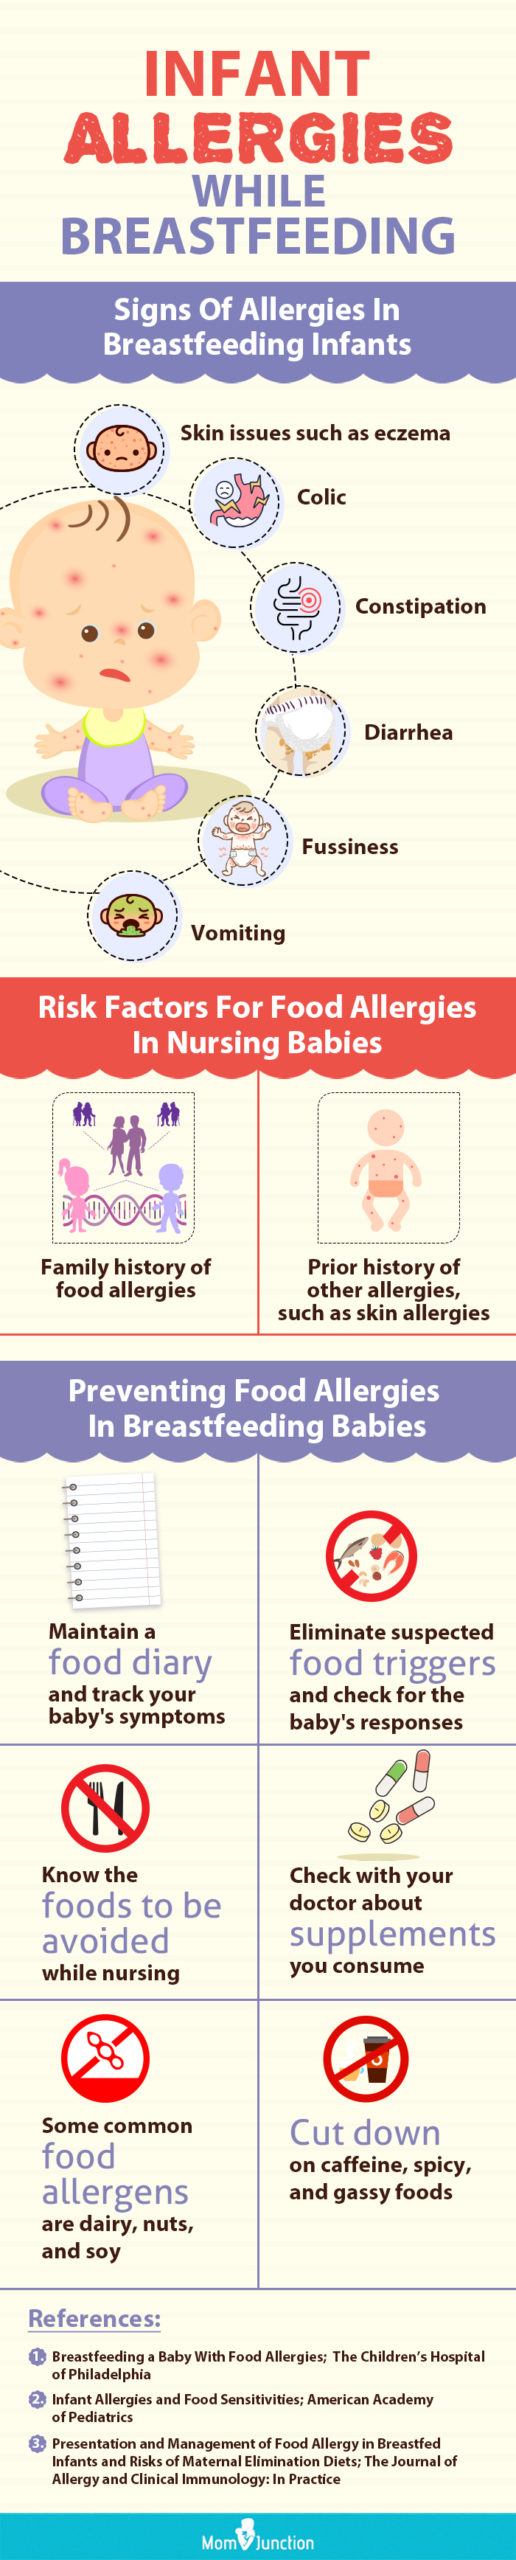 infant allergies while breastfeeding [infographic]